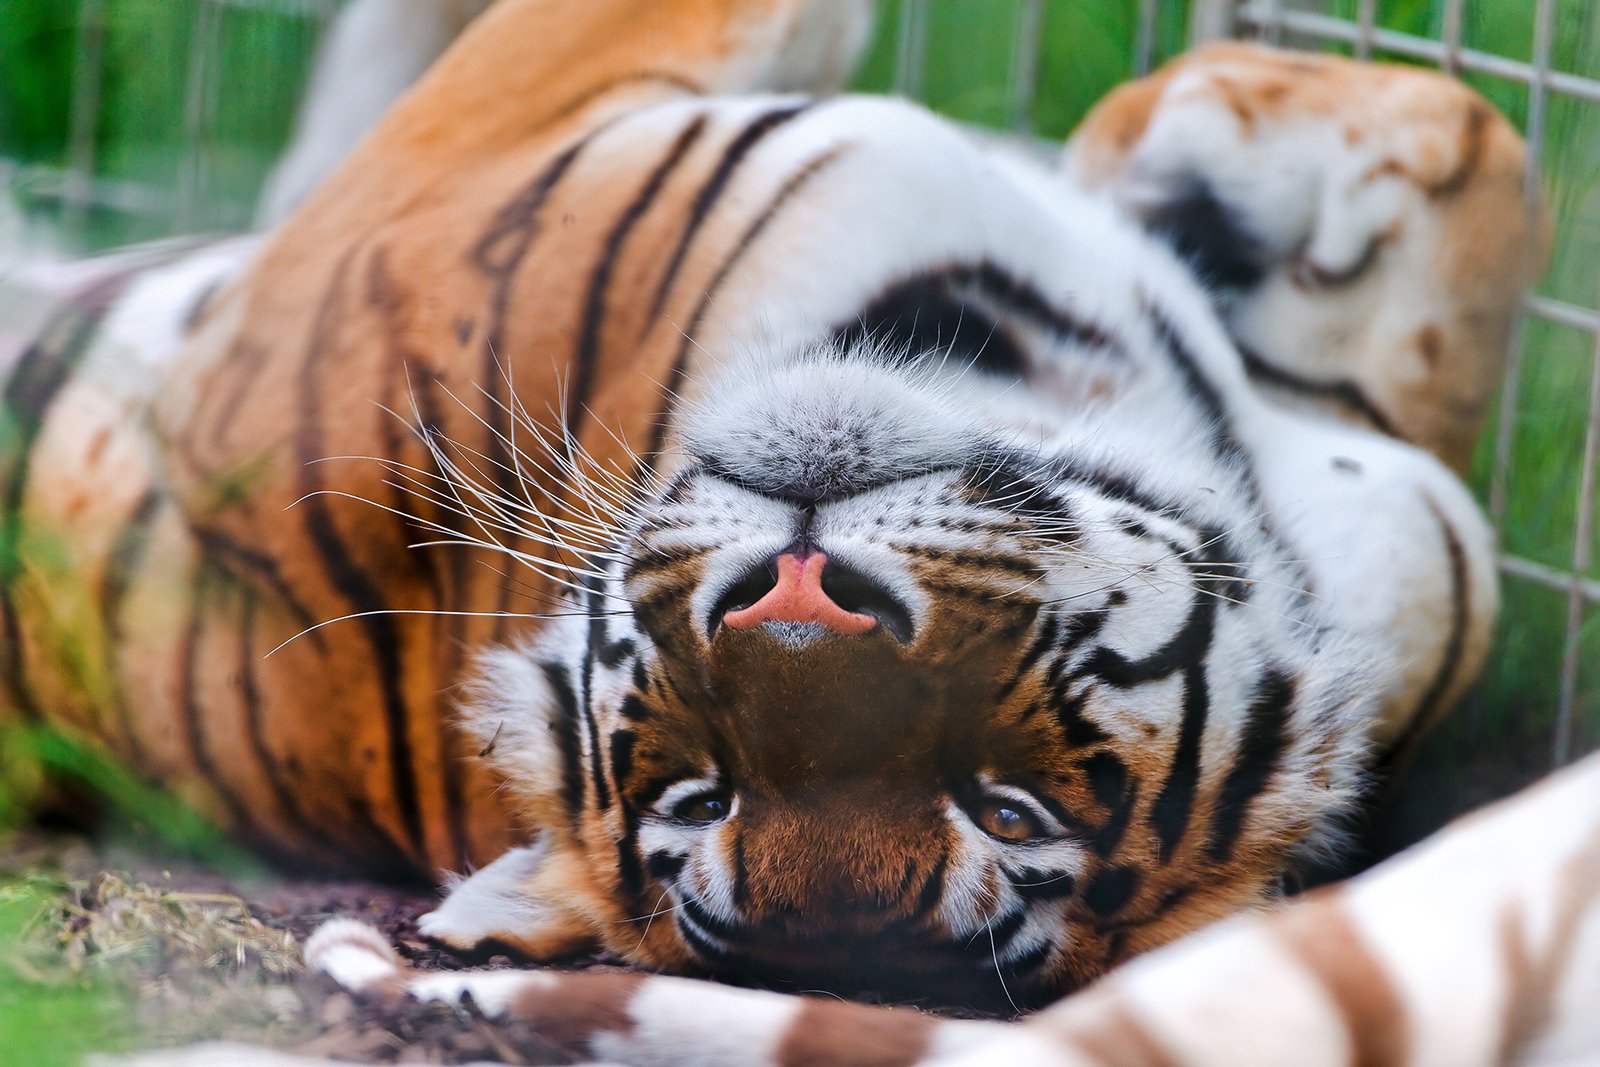 How to see a Bengal tiger in Dubai